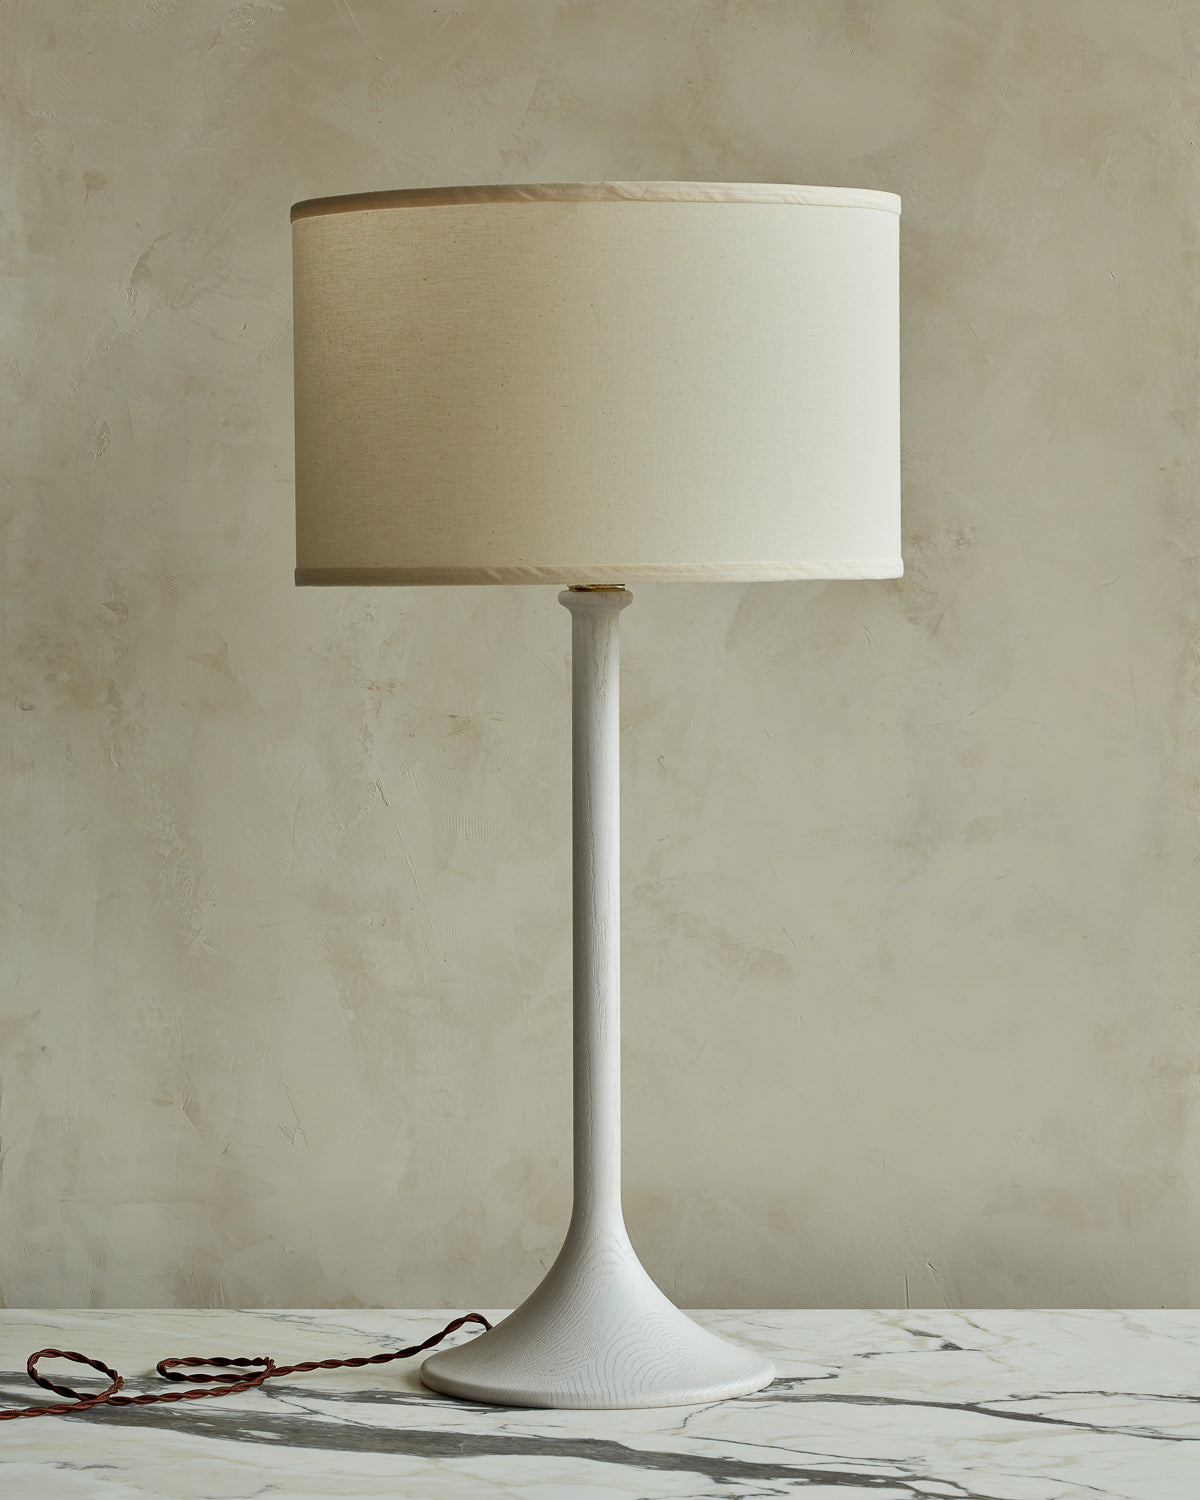 Large Trumpet table lamp with white wash finish and ivory drum shade